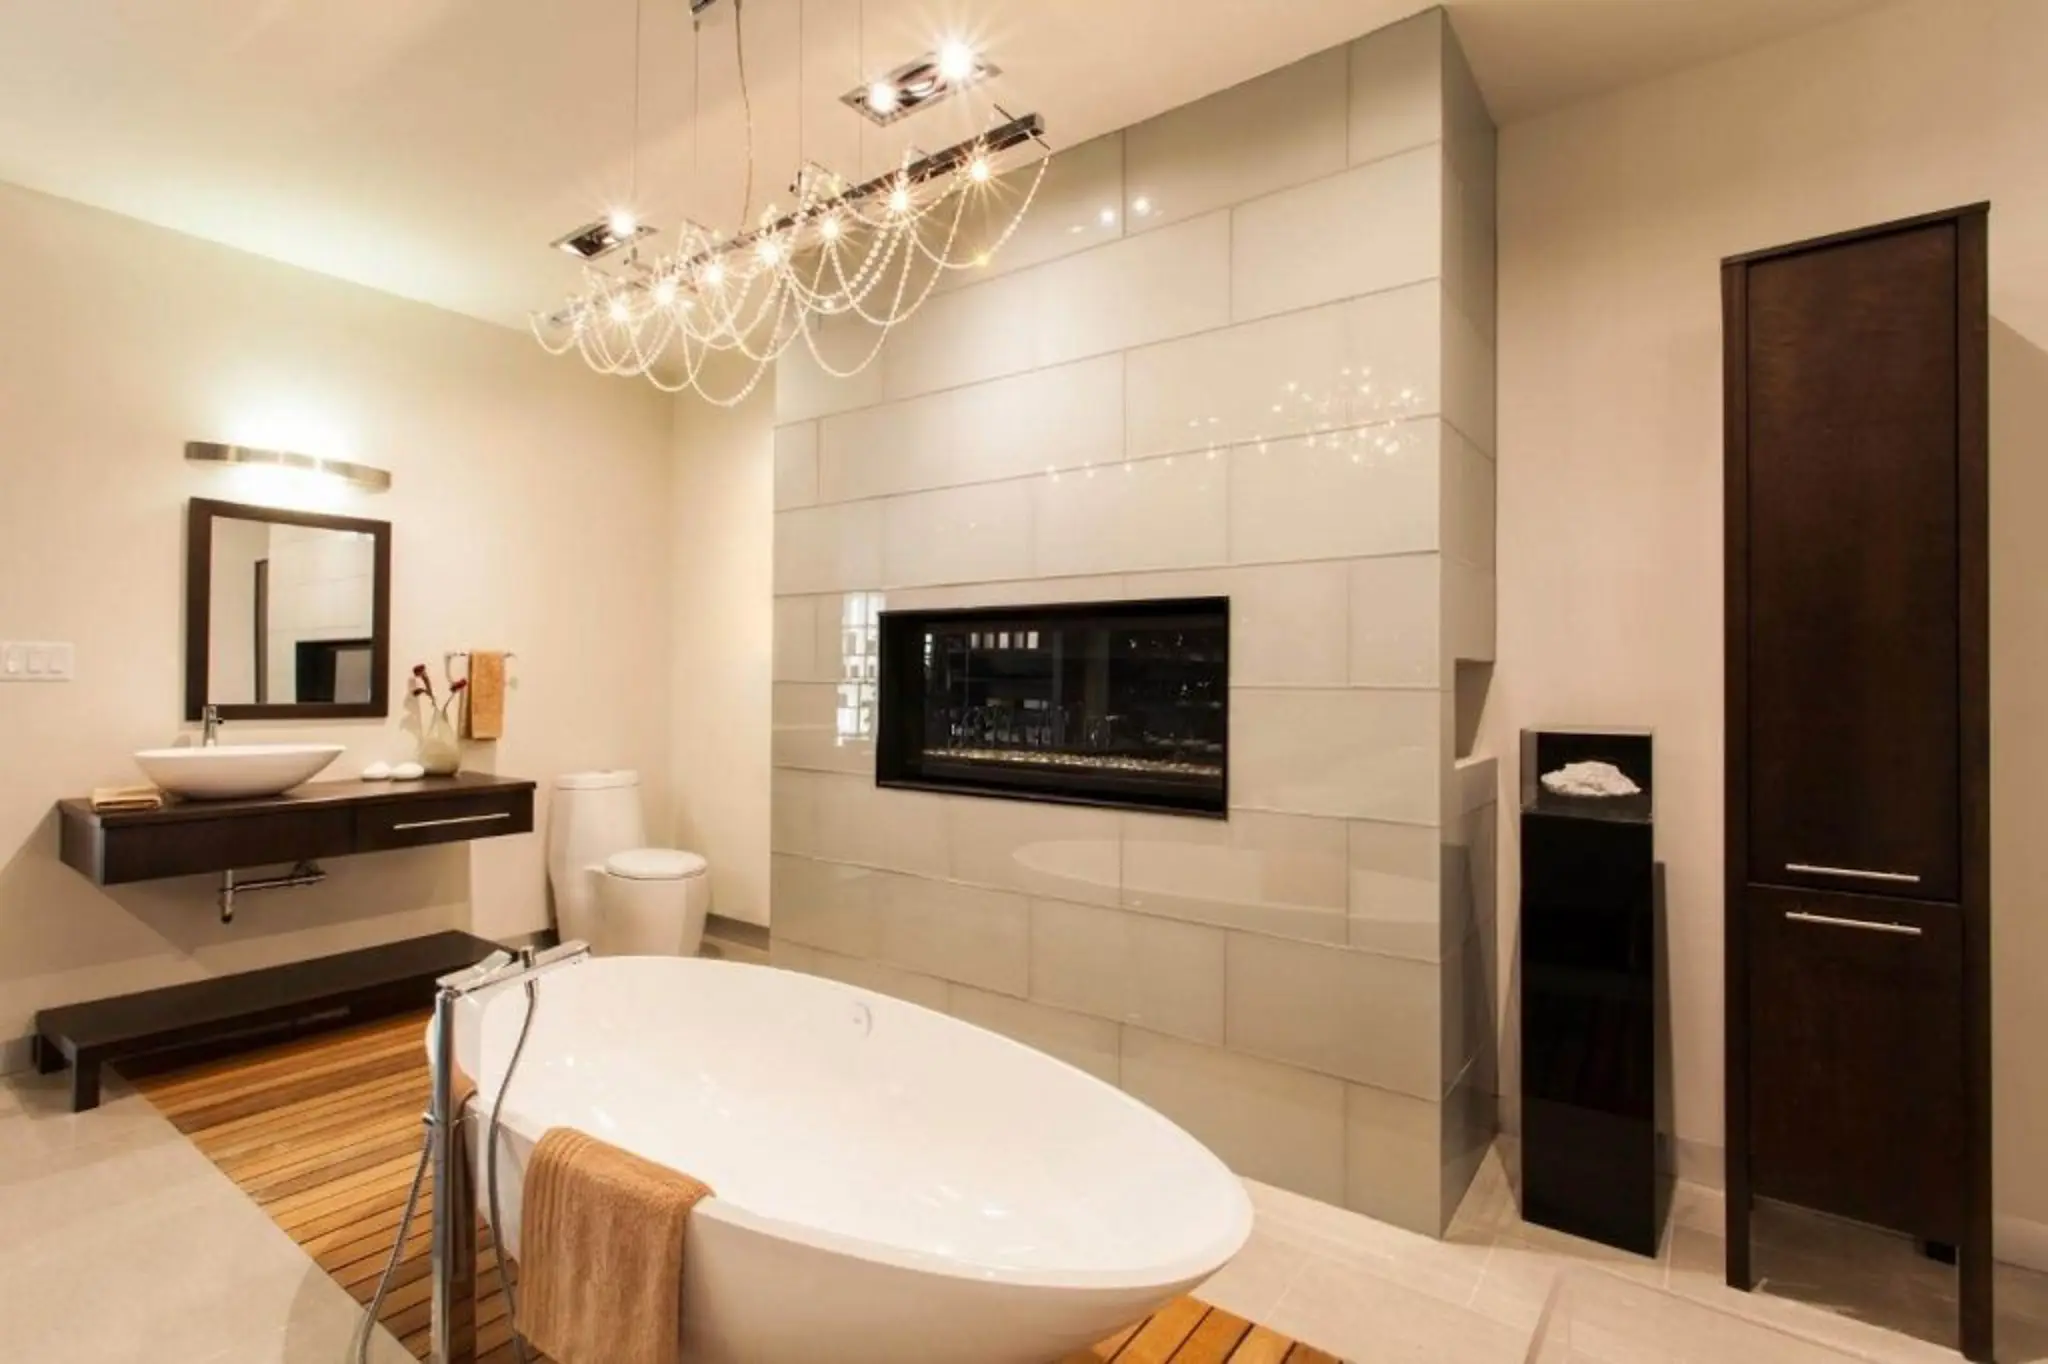 Transform Your Space with Expert Overland Park Bathroom Remodel Contractors Near Me